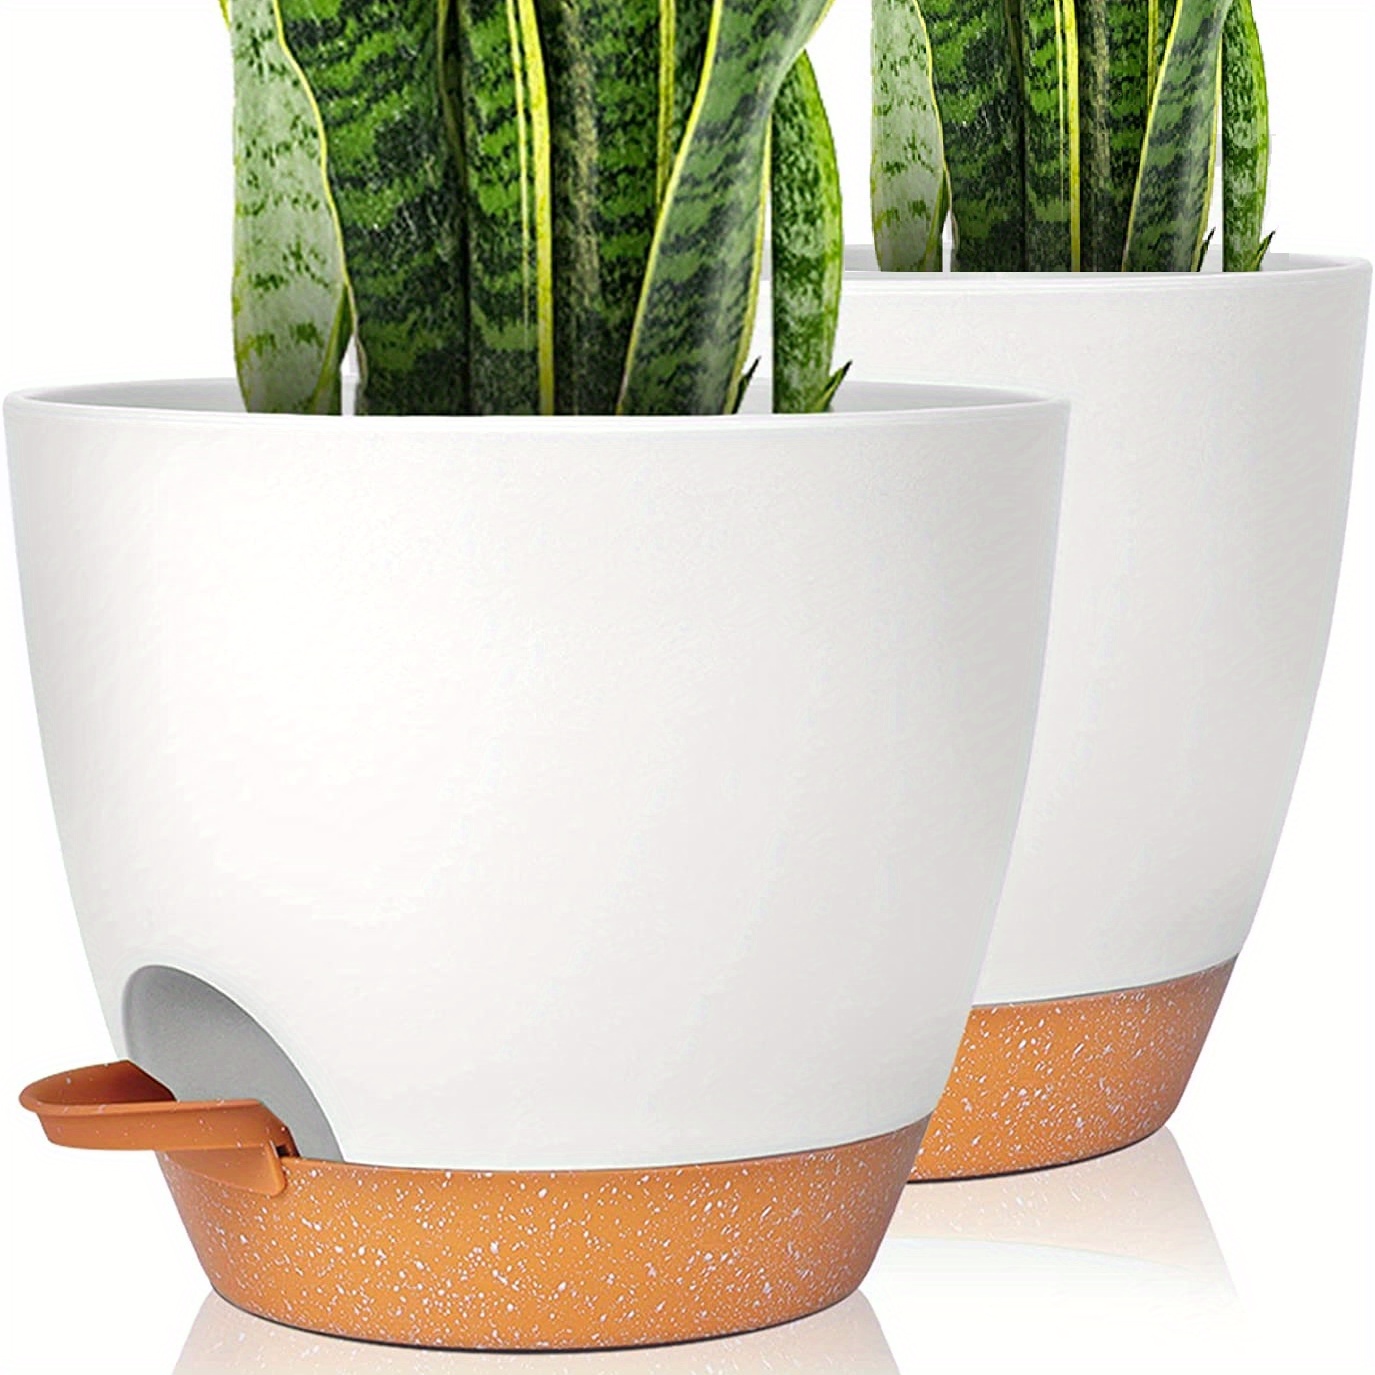 Extra-large Plant Pot with Stand - Black - Home All